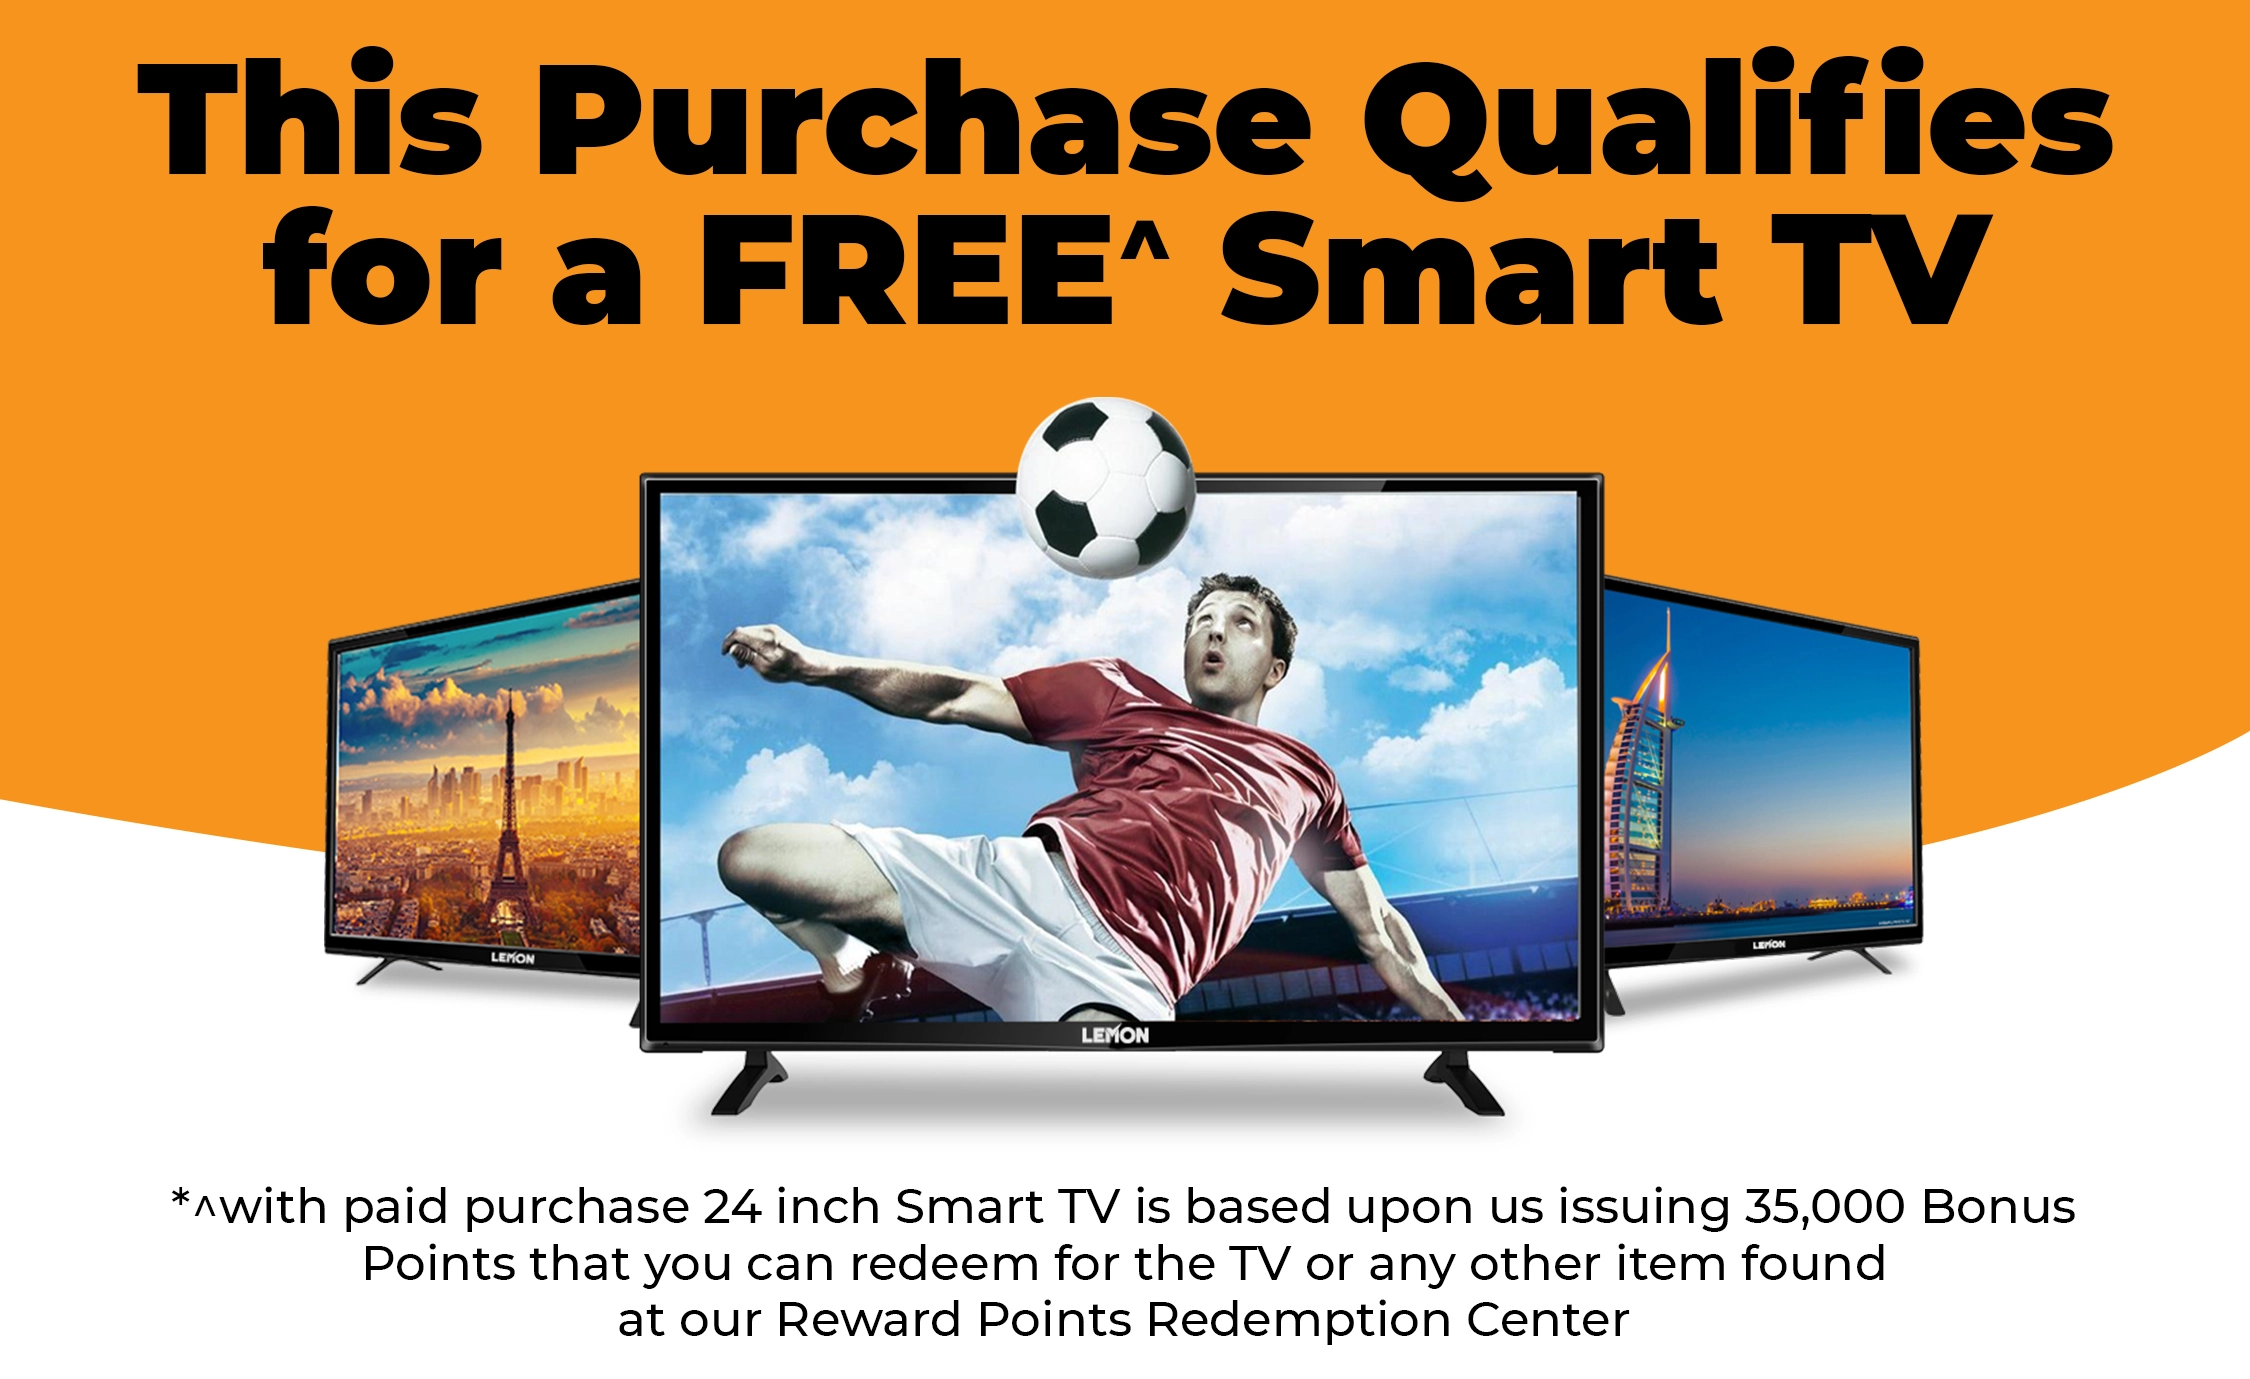 This Purchase Qualifies for a FREE^ Smart TV (^ with paid purchase 24 inch Smart TV is based upon us issuing 35,000 Bonus Points that you can redeem for the TV or any other item found at our Reward Points Redemption Center).